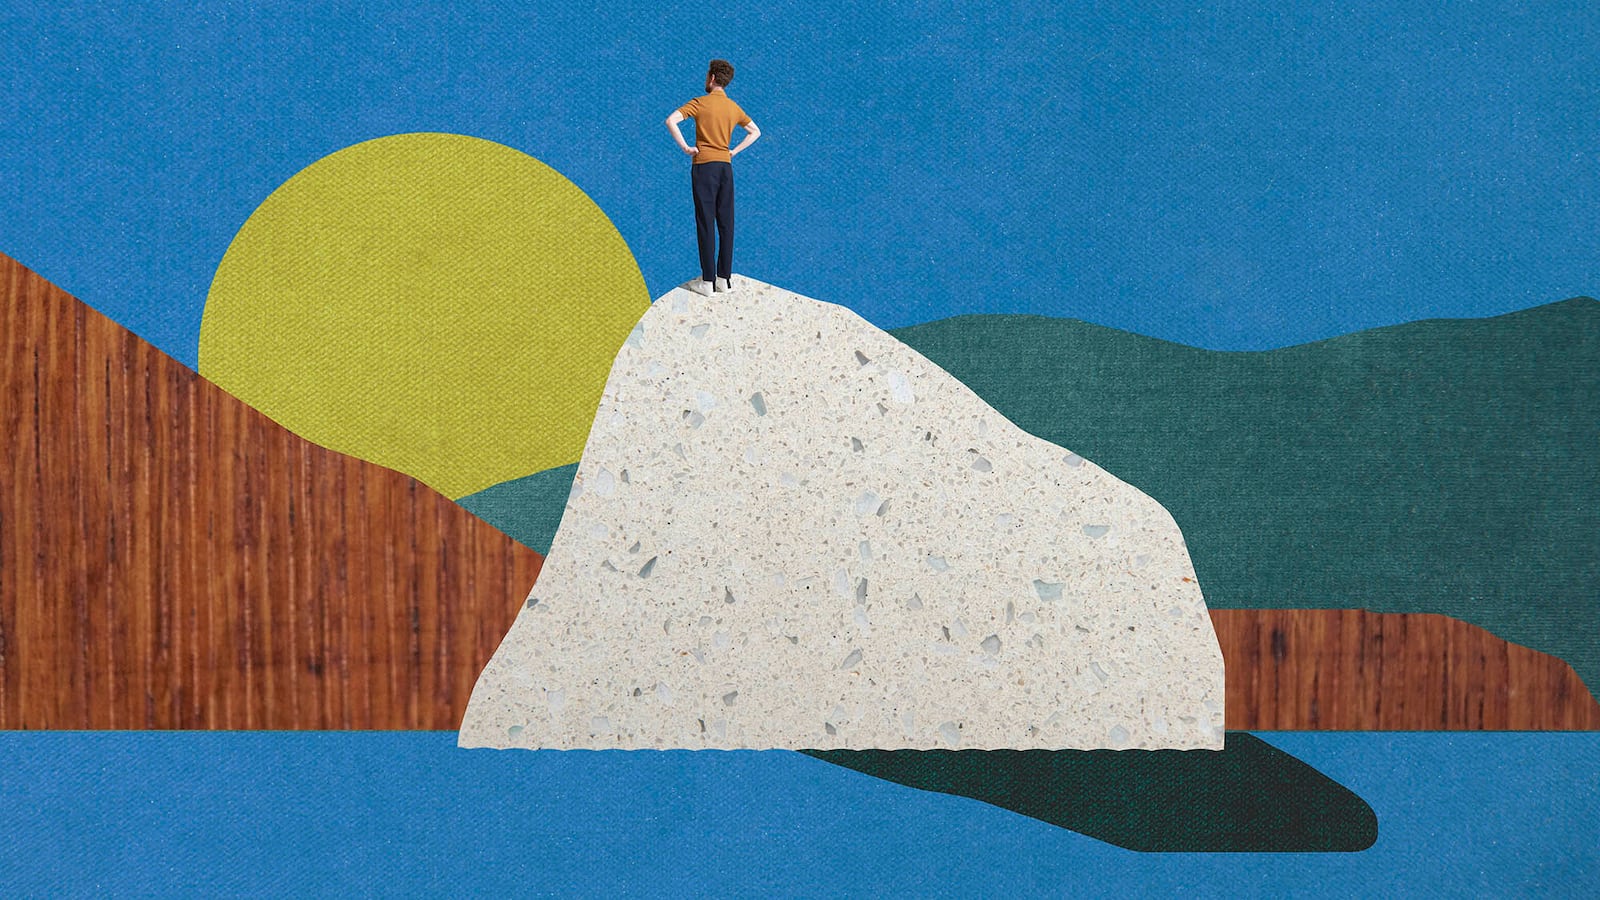 A colorful illustration showing a person standing on stop of a giant rock with the sun, a green grass hill in the background.